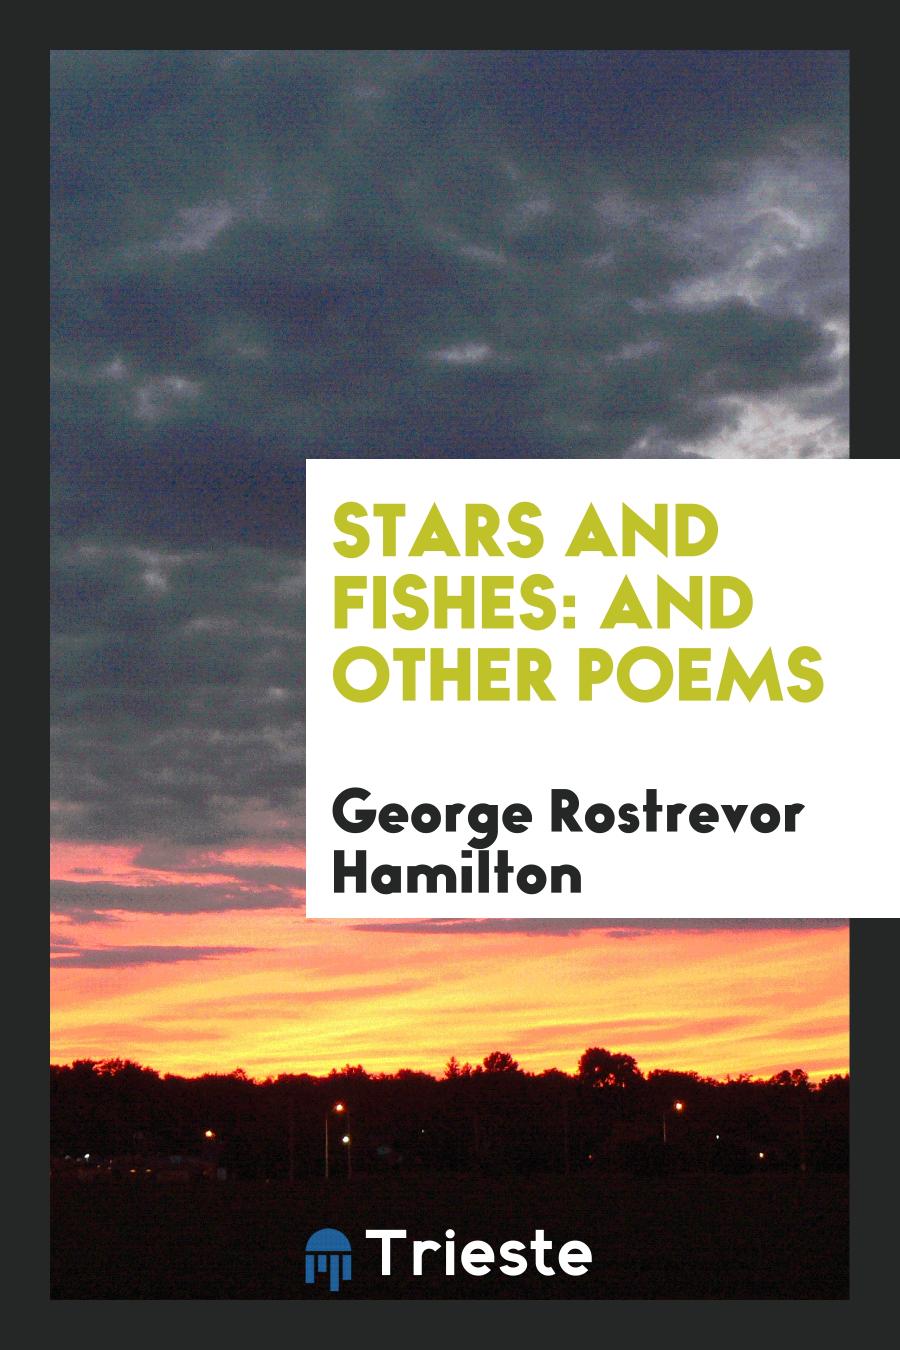 Stars and Fishes: And Other Poems